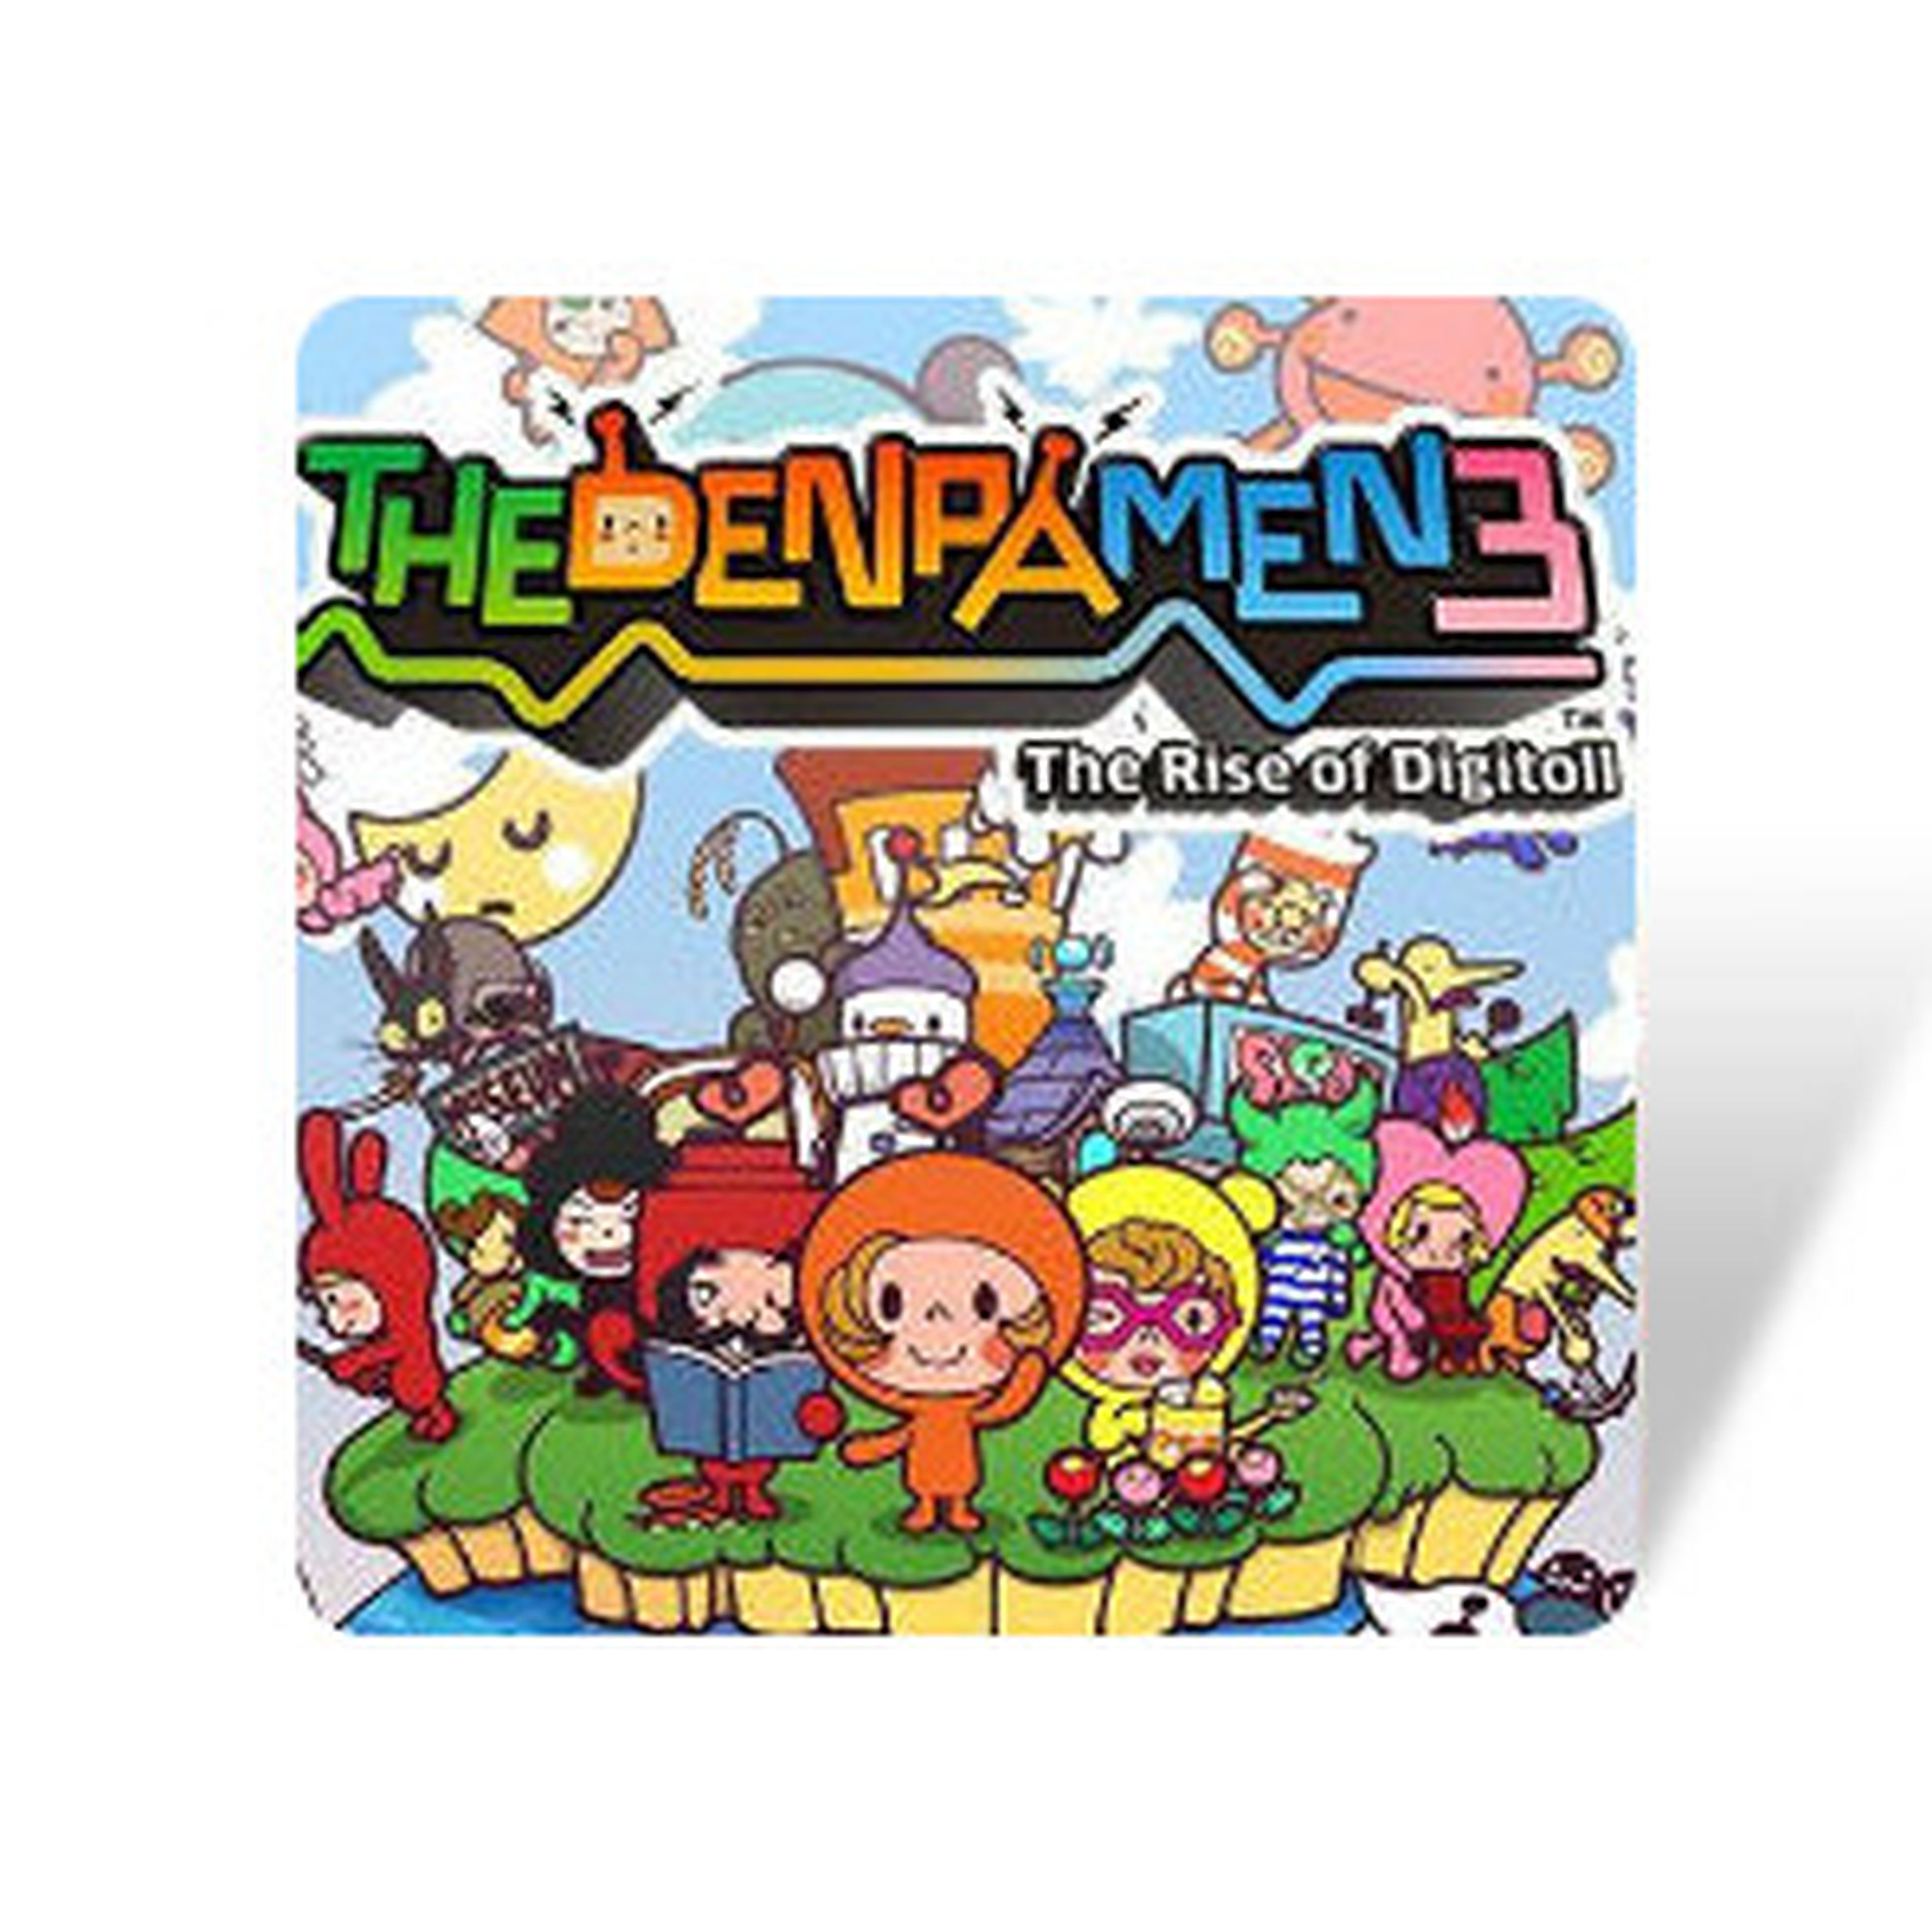 The Denpa Men 3 The Rise of Digitoll para 3DS